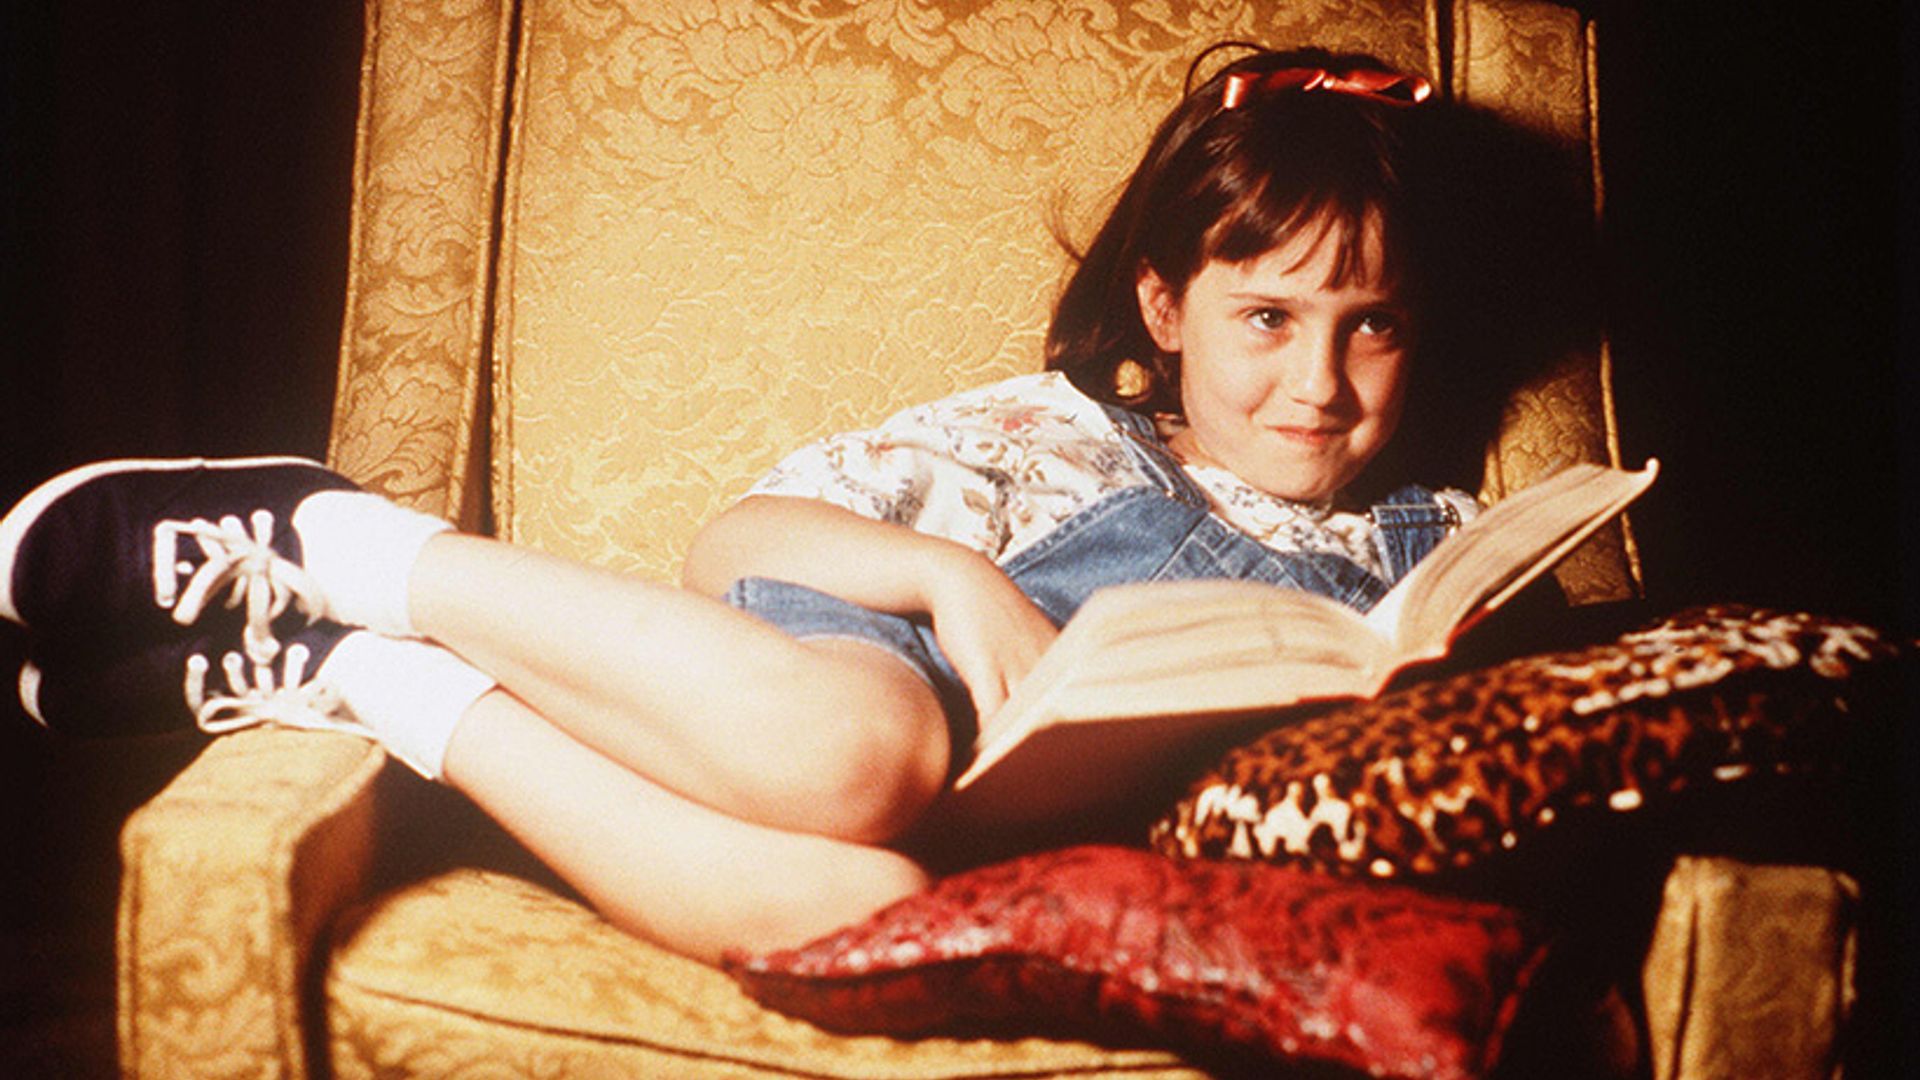 Matilda star Mara Wilson, 29, is all grown up! See her latest TV appearance